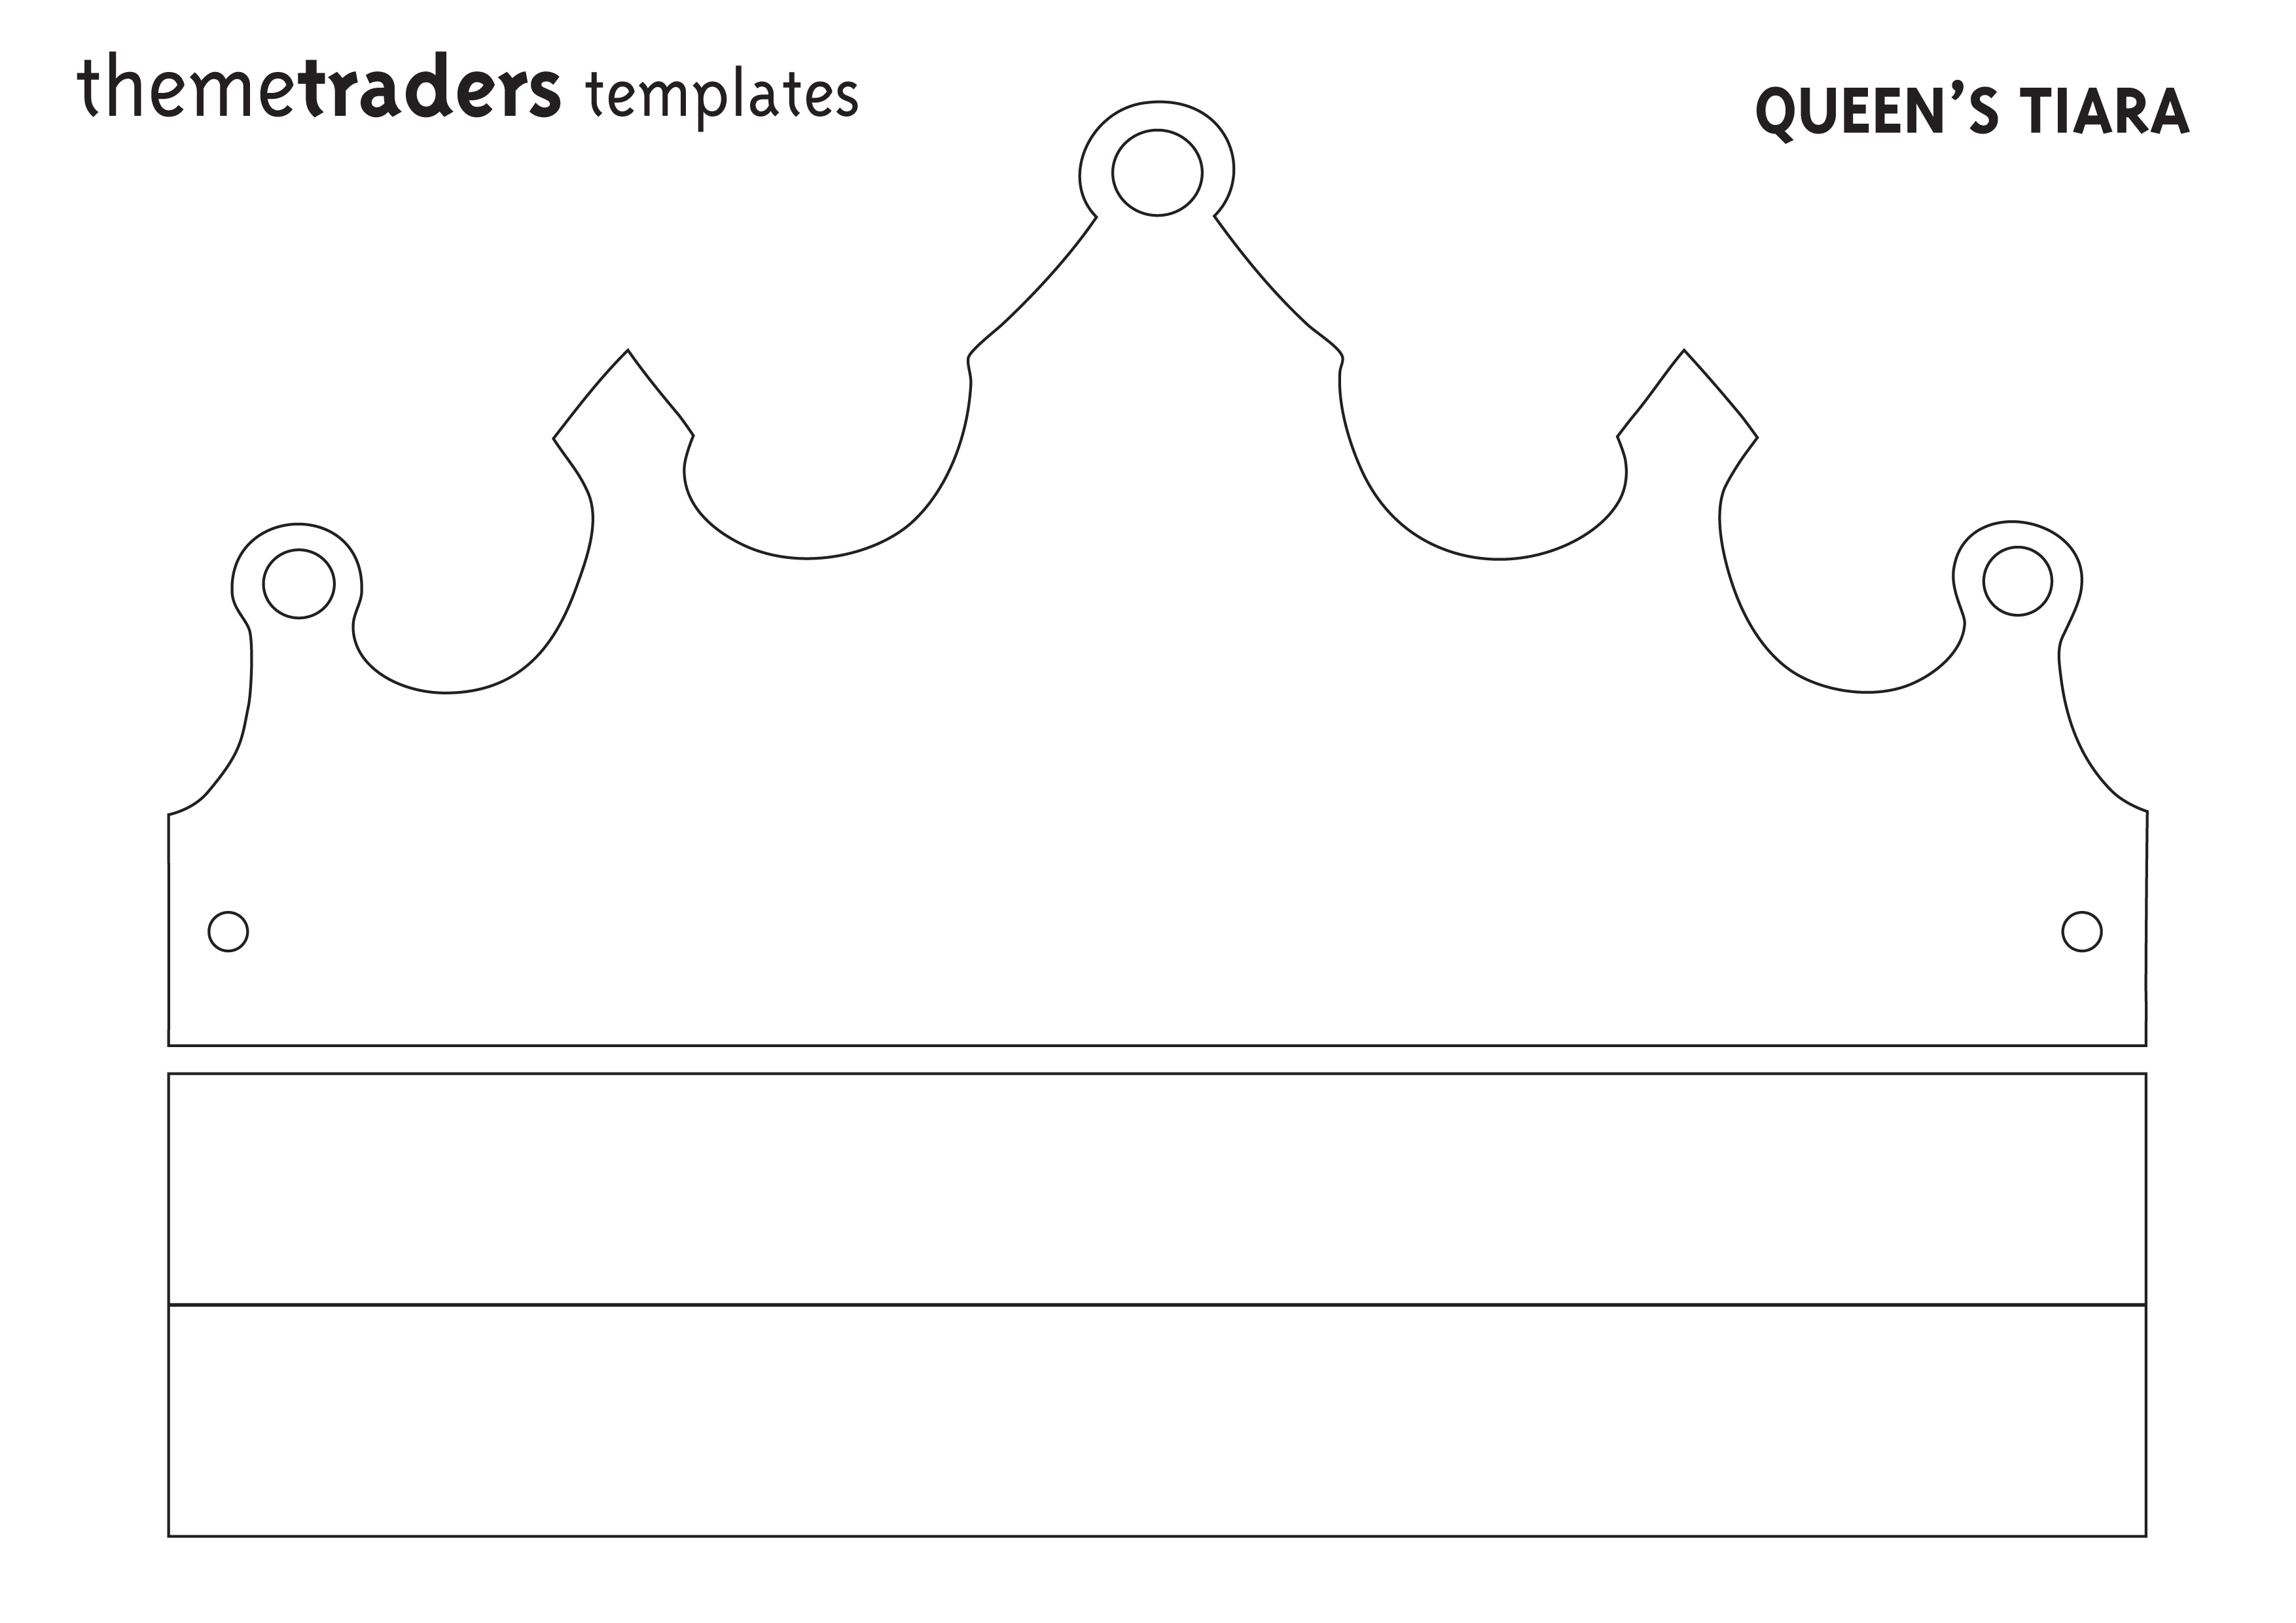 Free Crown Template, Download Free Crown Template png images, Free